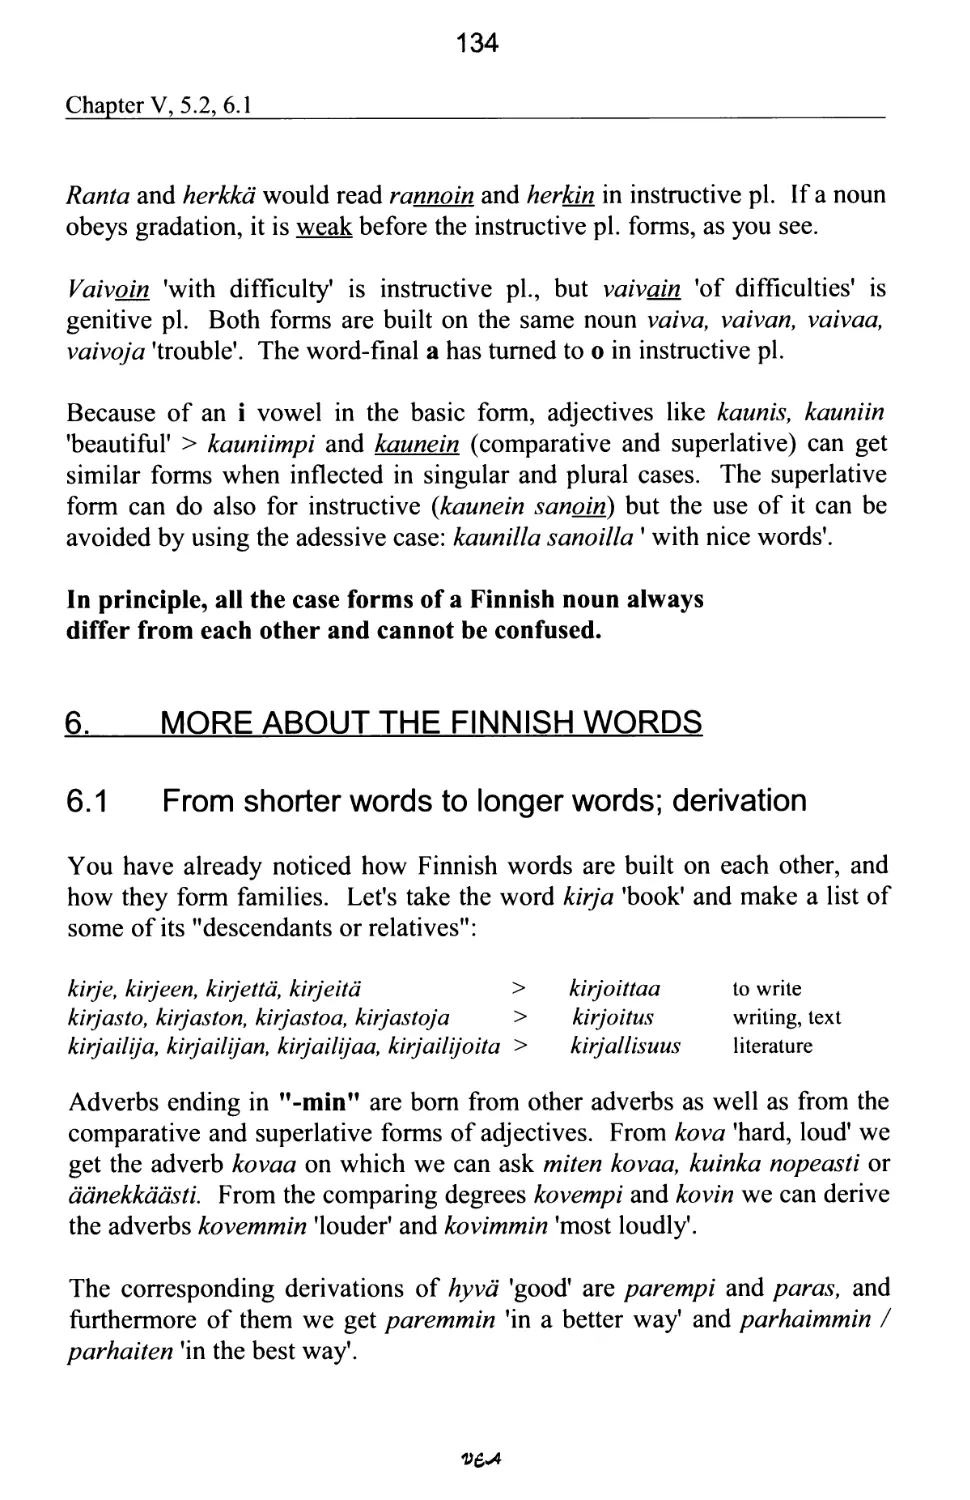 6. MORE ABOUT THE FINNISH WORDS